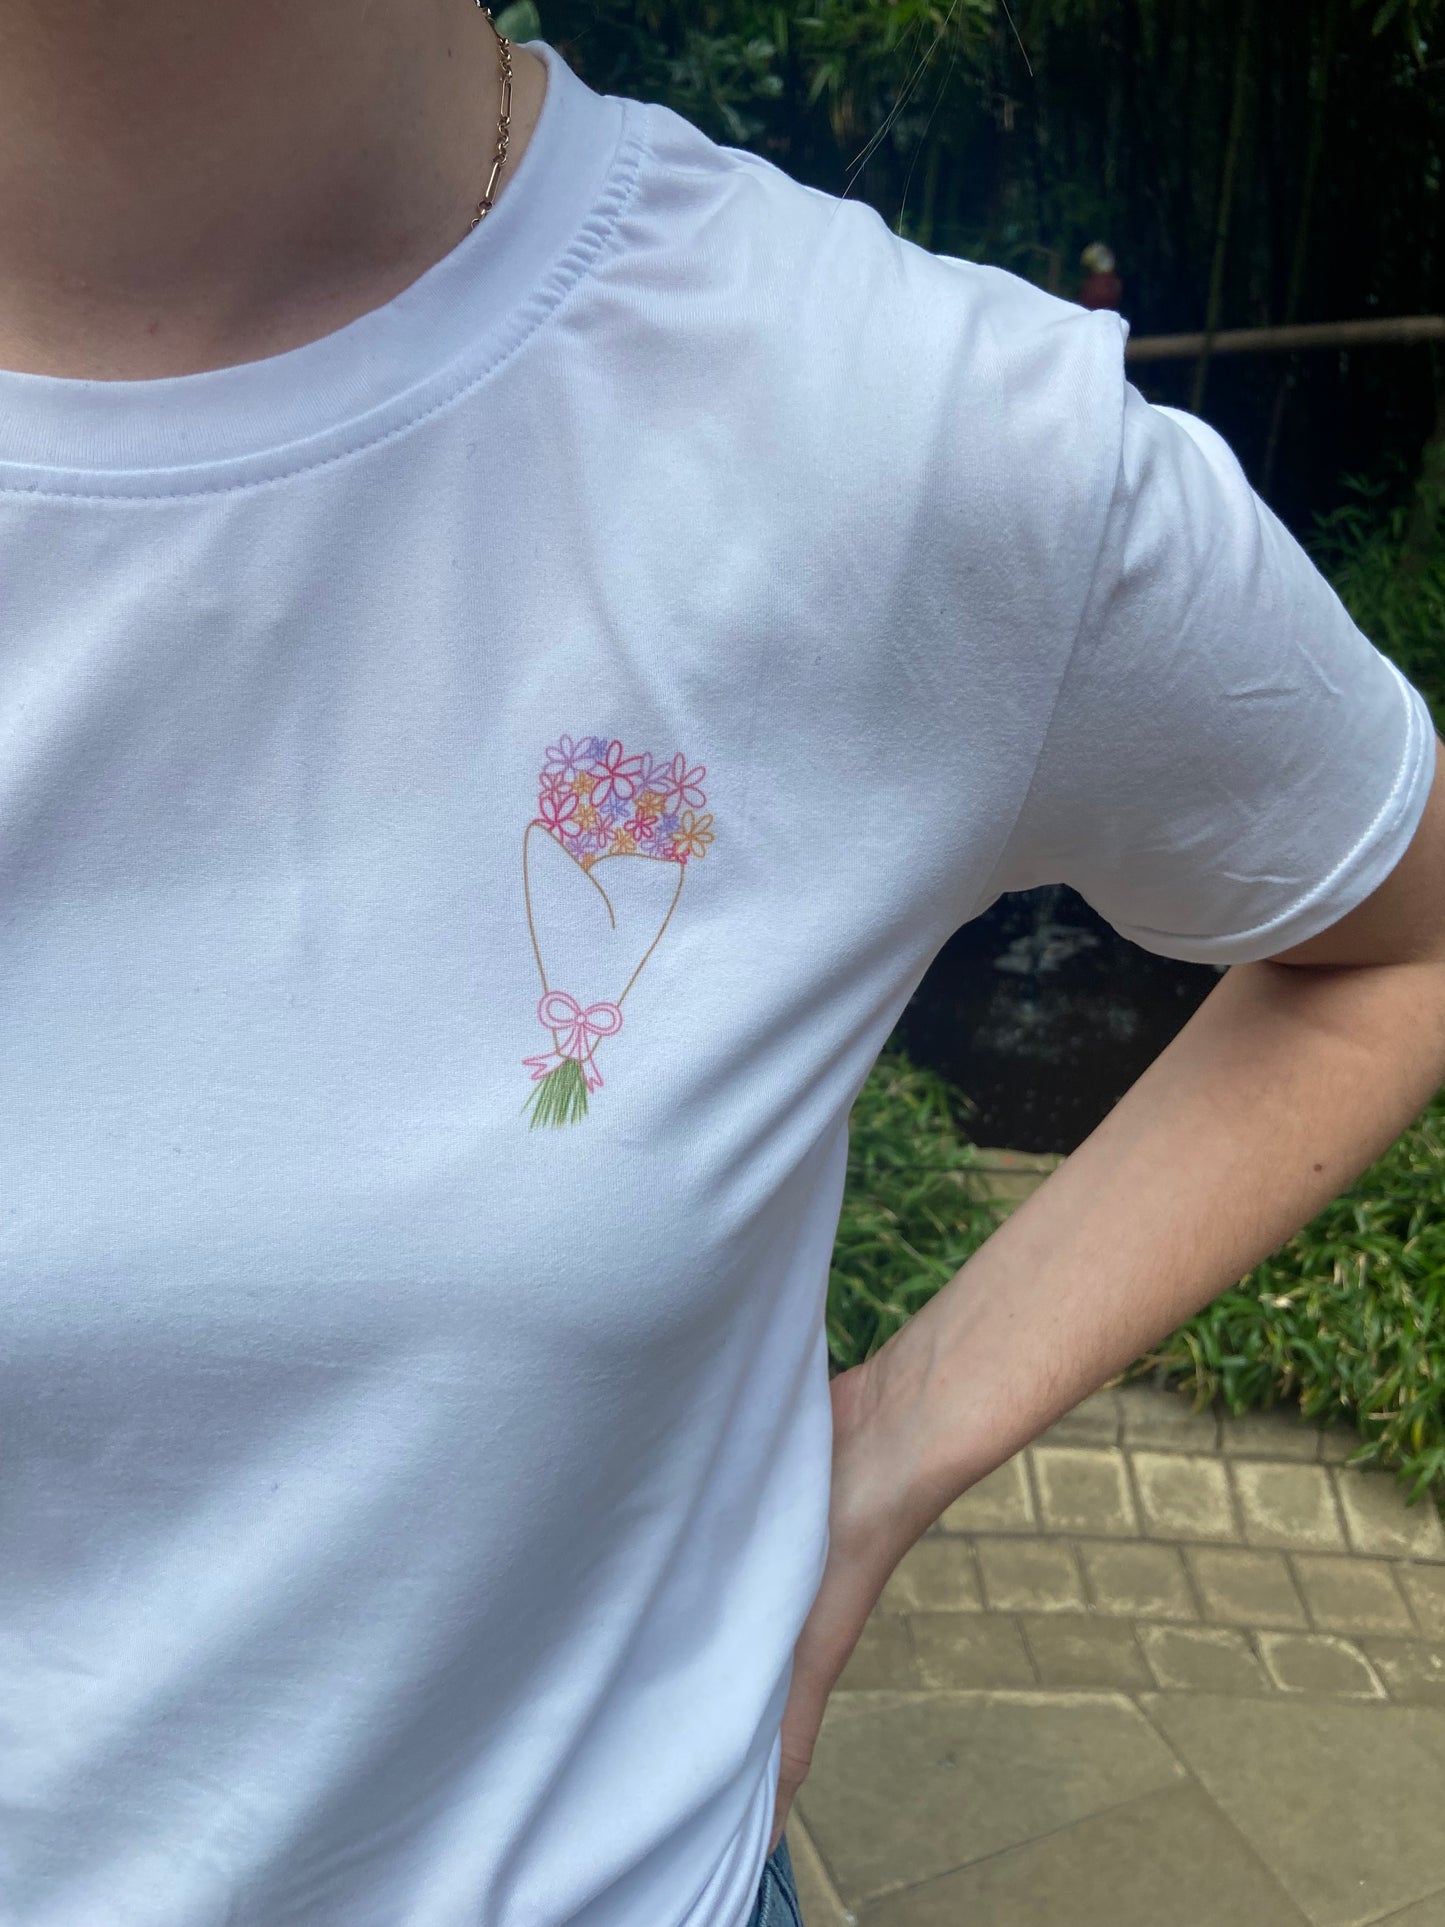 Grapejuice T-shirt. “I was on my way to buy some flowers for you”